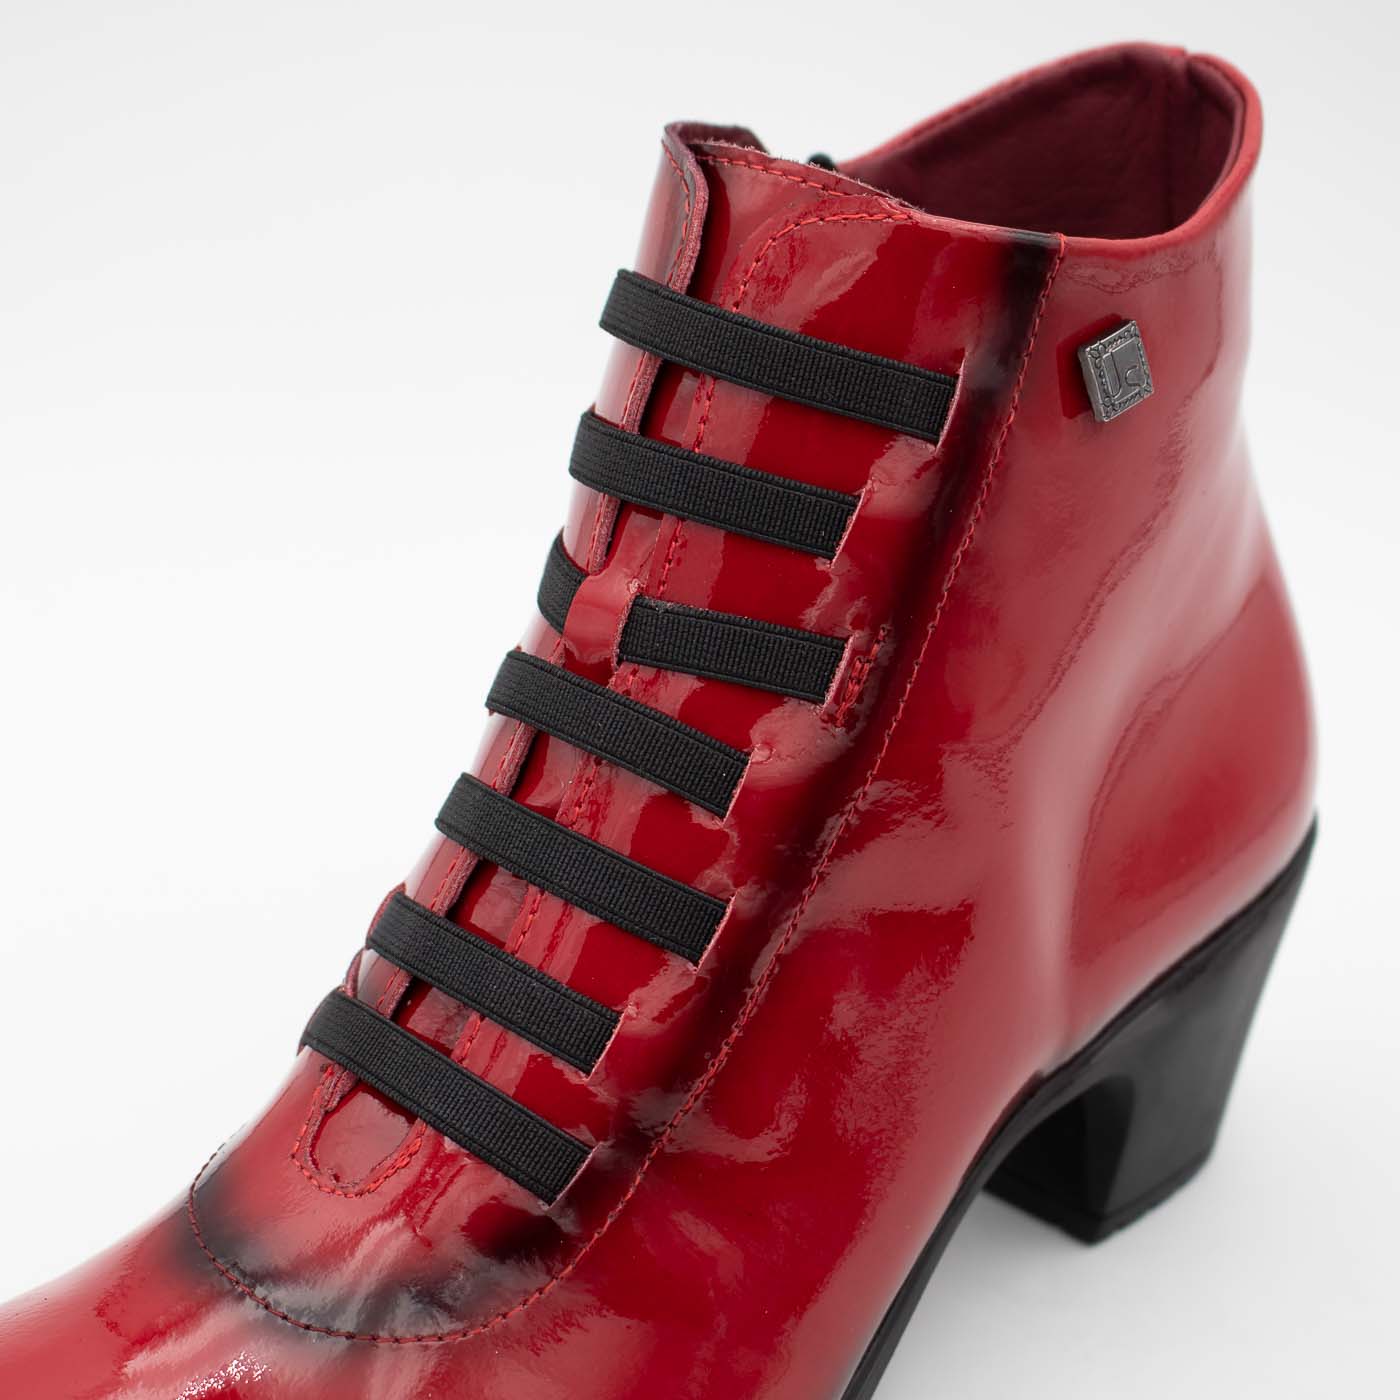 Side profile of Jose Saenz's glossy red patent ankle boot.